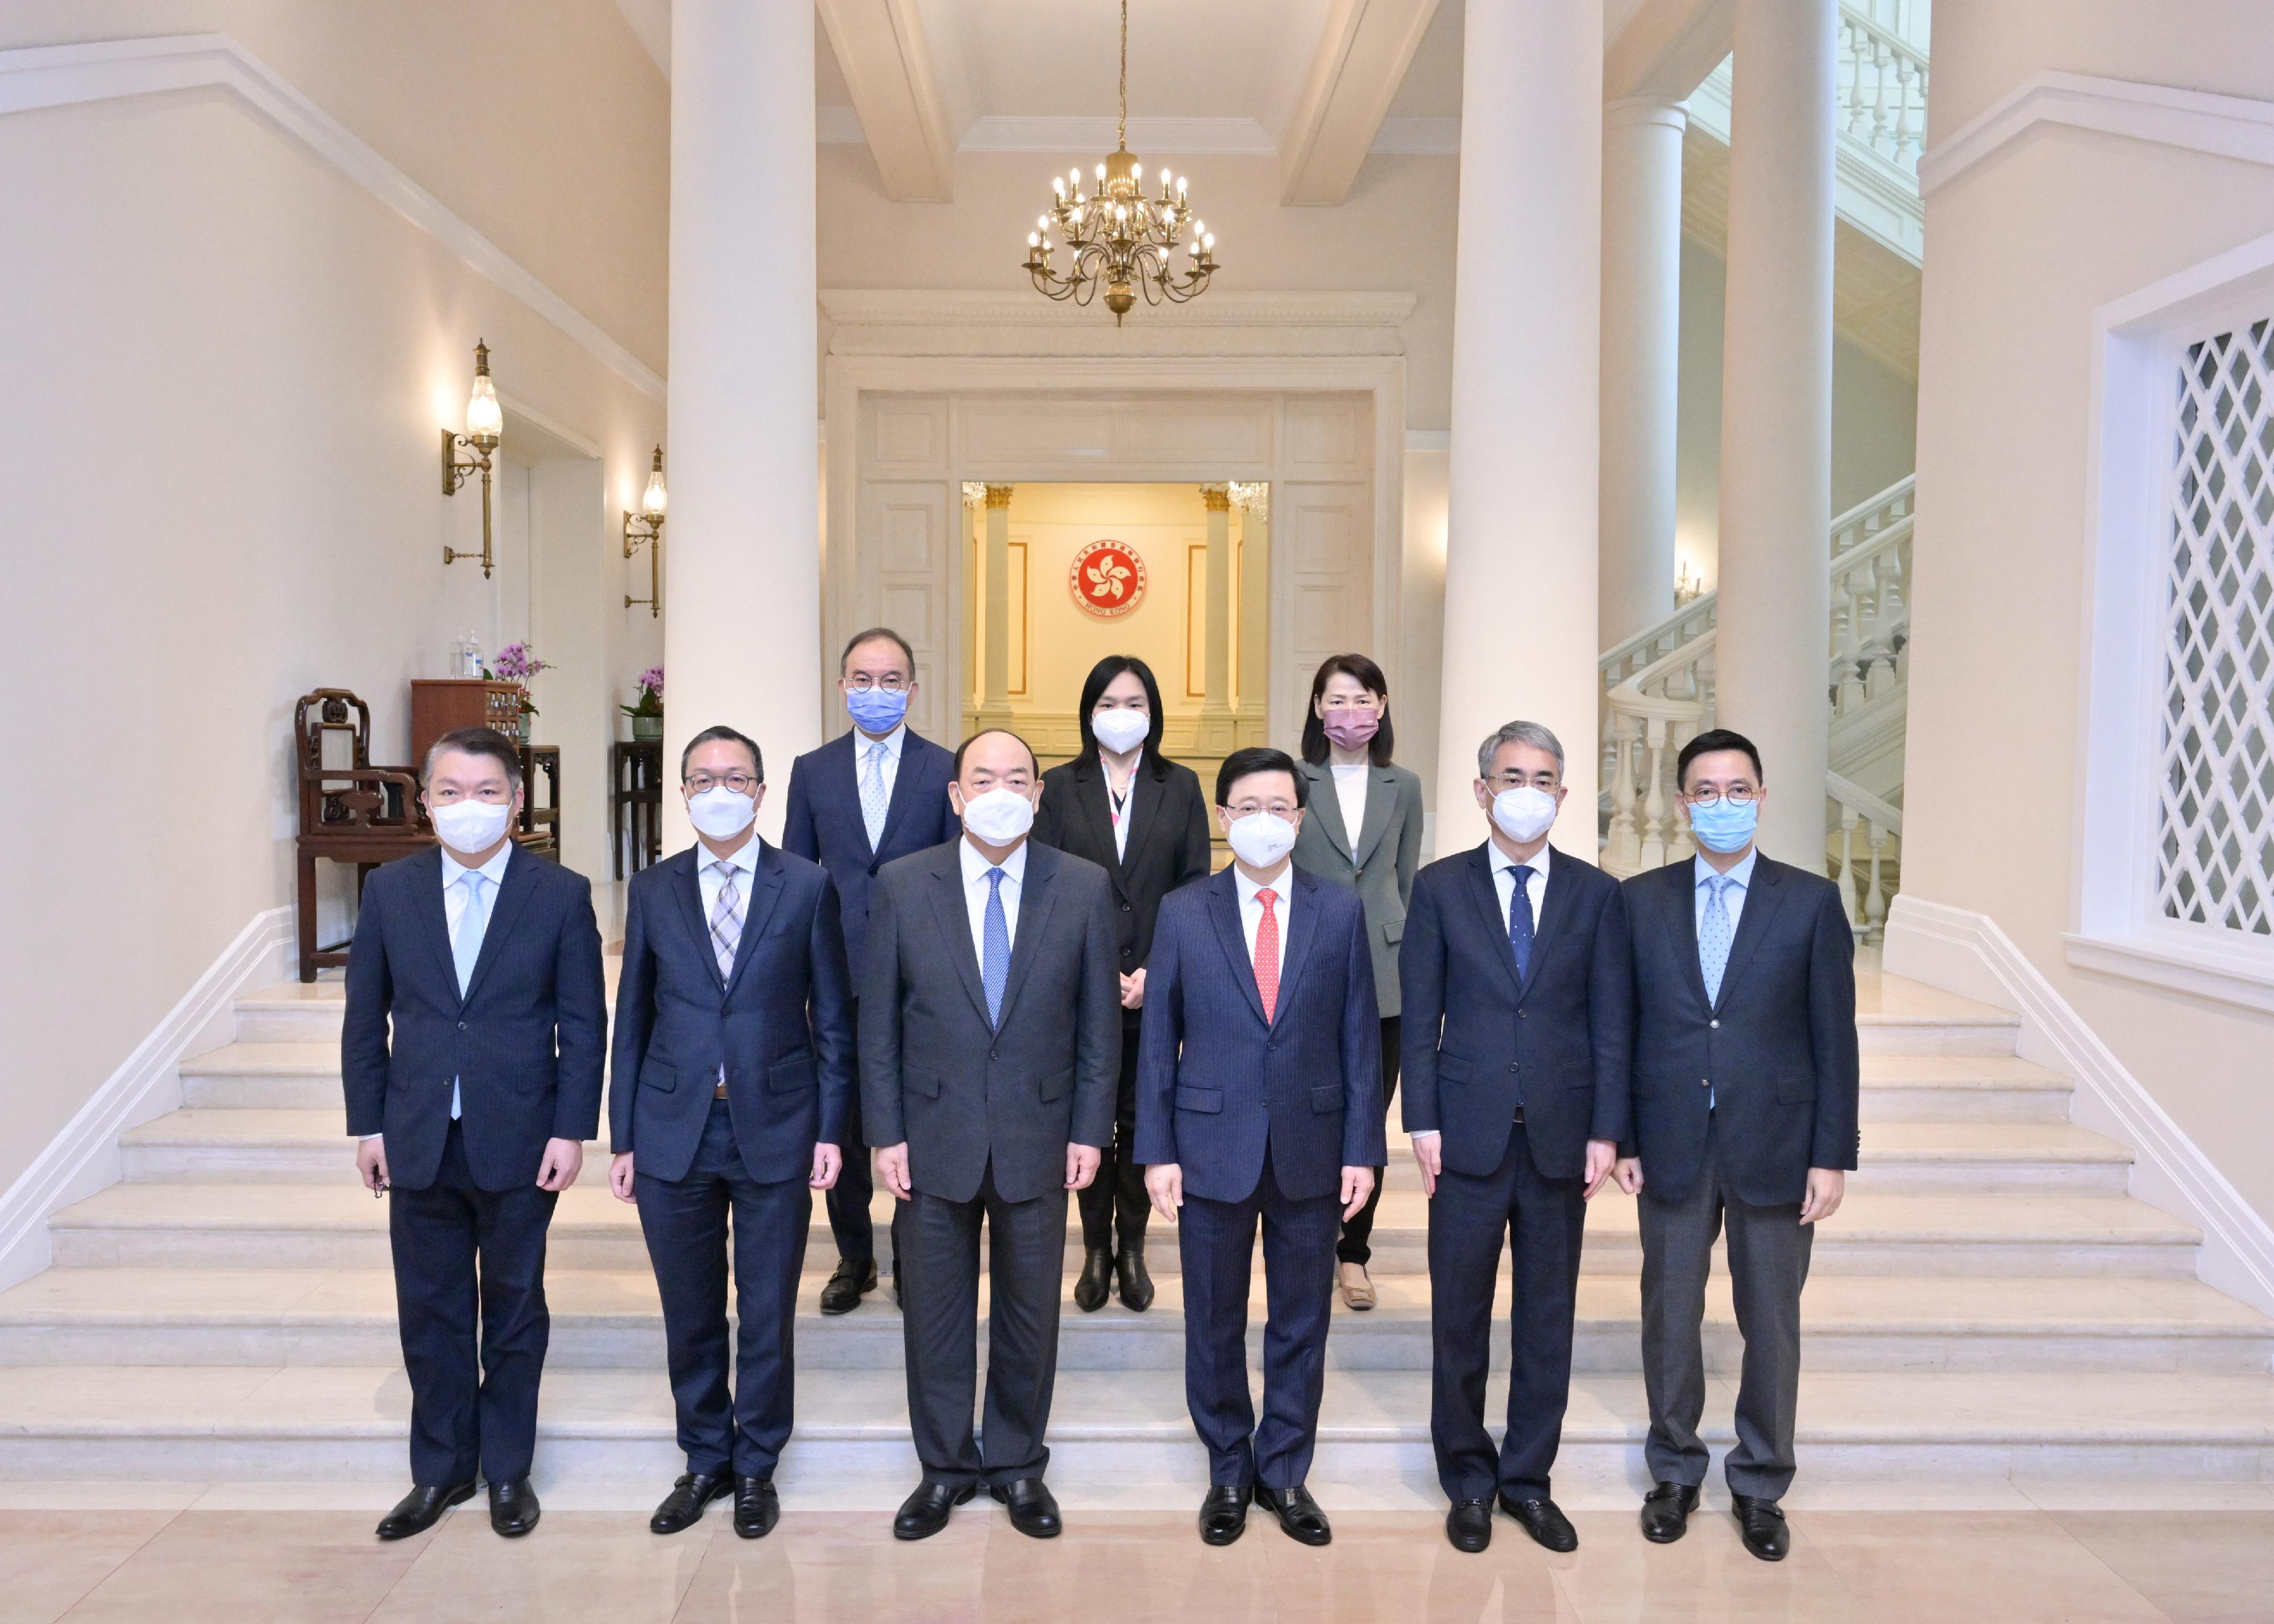 The Chief Executive, Mr John Lee (front row, third right), met with the Chief Executive of the Macao Special Administrative Region, Mr Ho Iat-seng (front row, third left), at Government House today (February 25). The Secretary for Justice, Mr Paul Lam, SC (front row, second left); the Secretary for Culture, Sports and Tourism, Mr Kevin Yeung (front row, first right); the Secretary for Constitutional and Mainland Affairs, Mr Erick Tsang Kwok-wai (back row, left), and the Director of the Chief Executive's Office, Ms Carol Yip (back row, right), also attended the meeting.